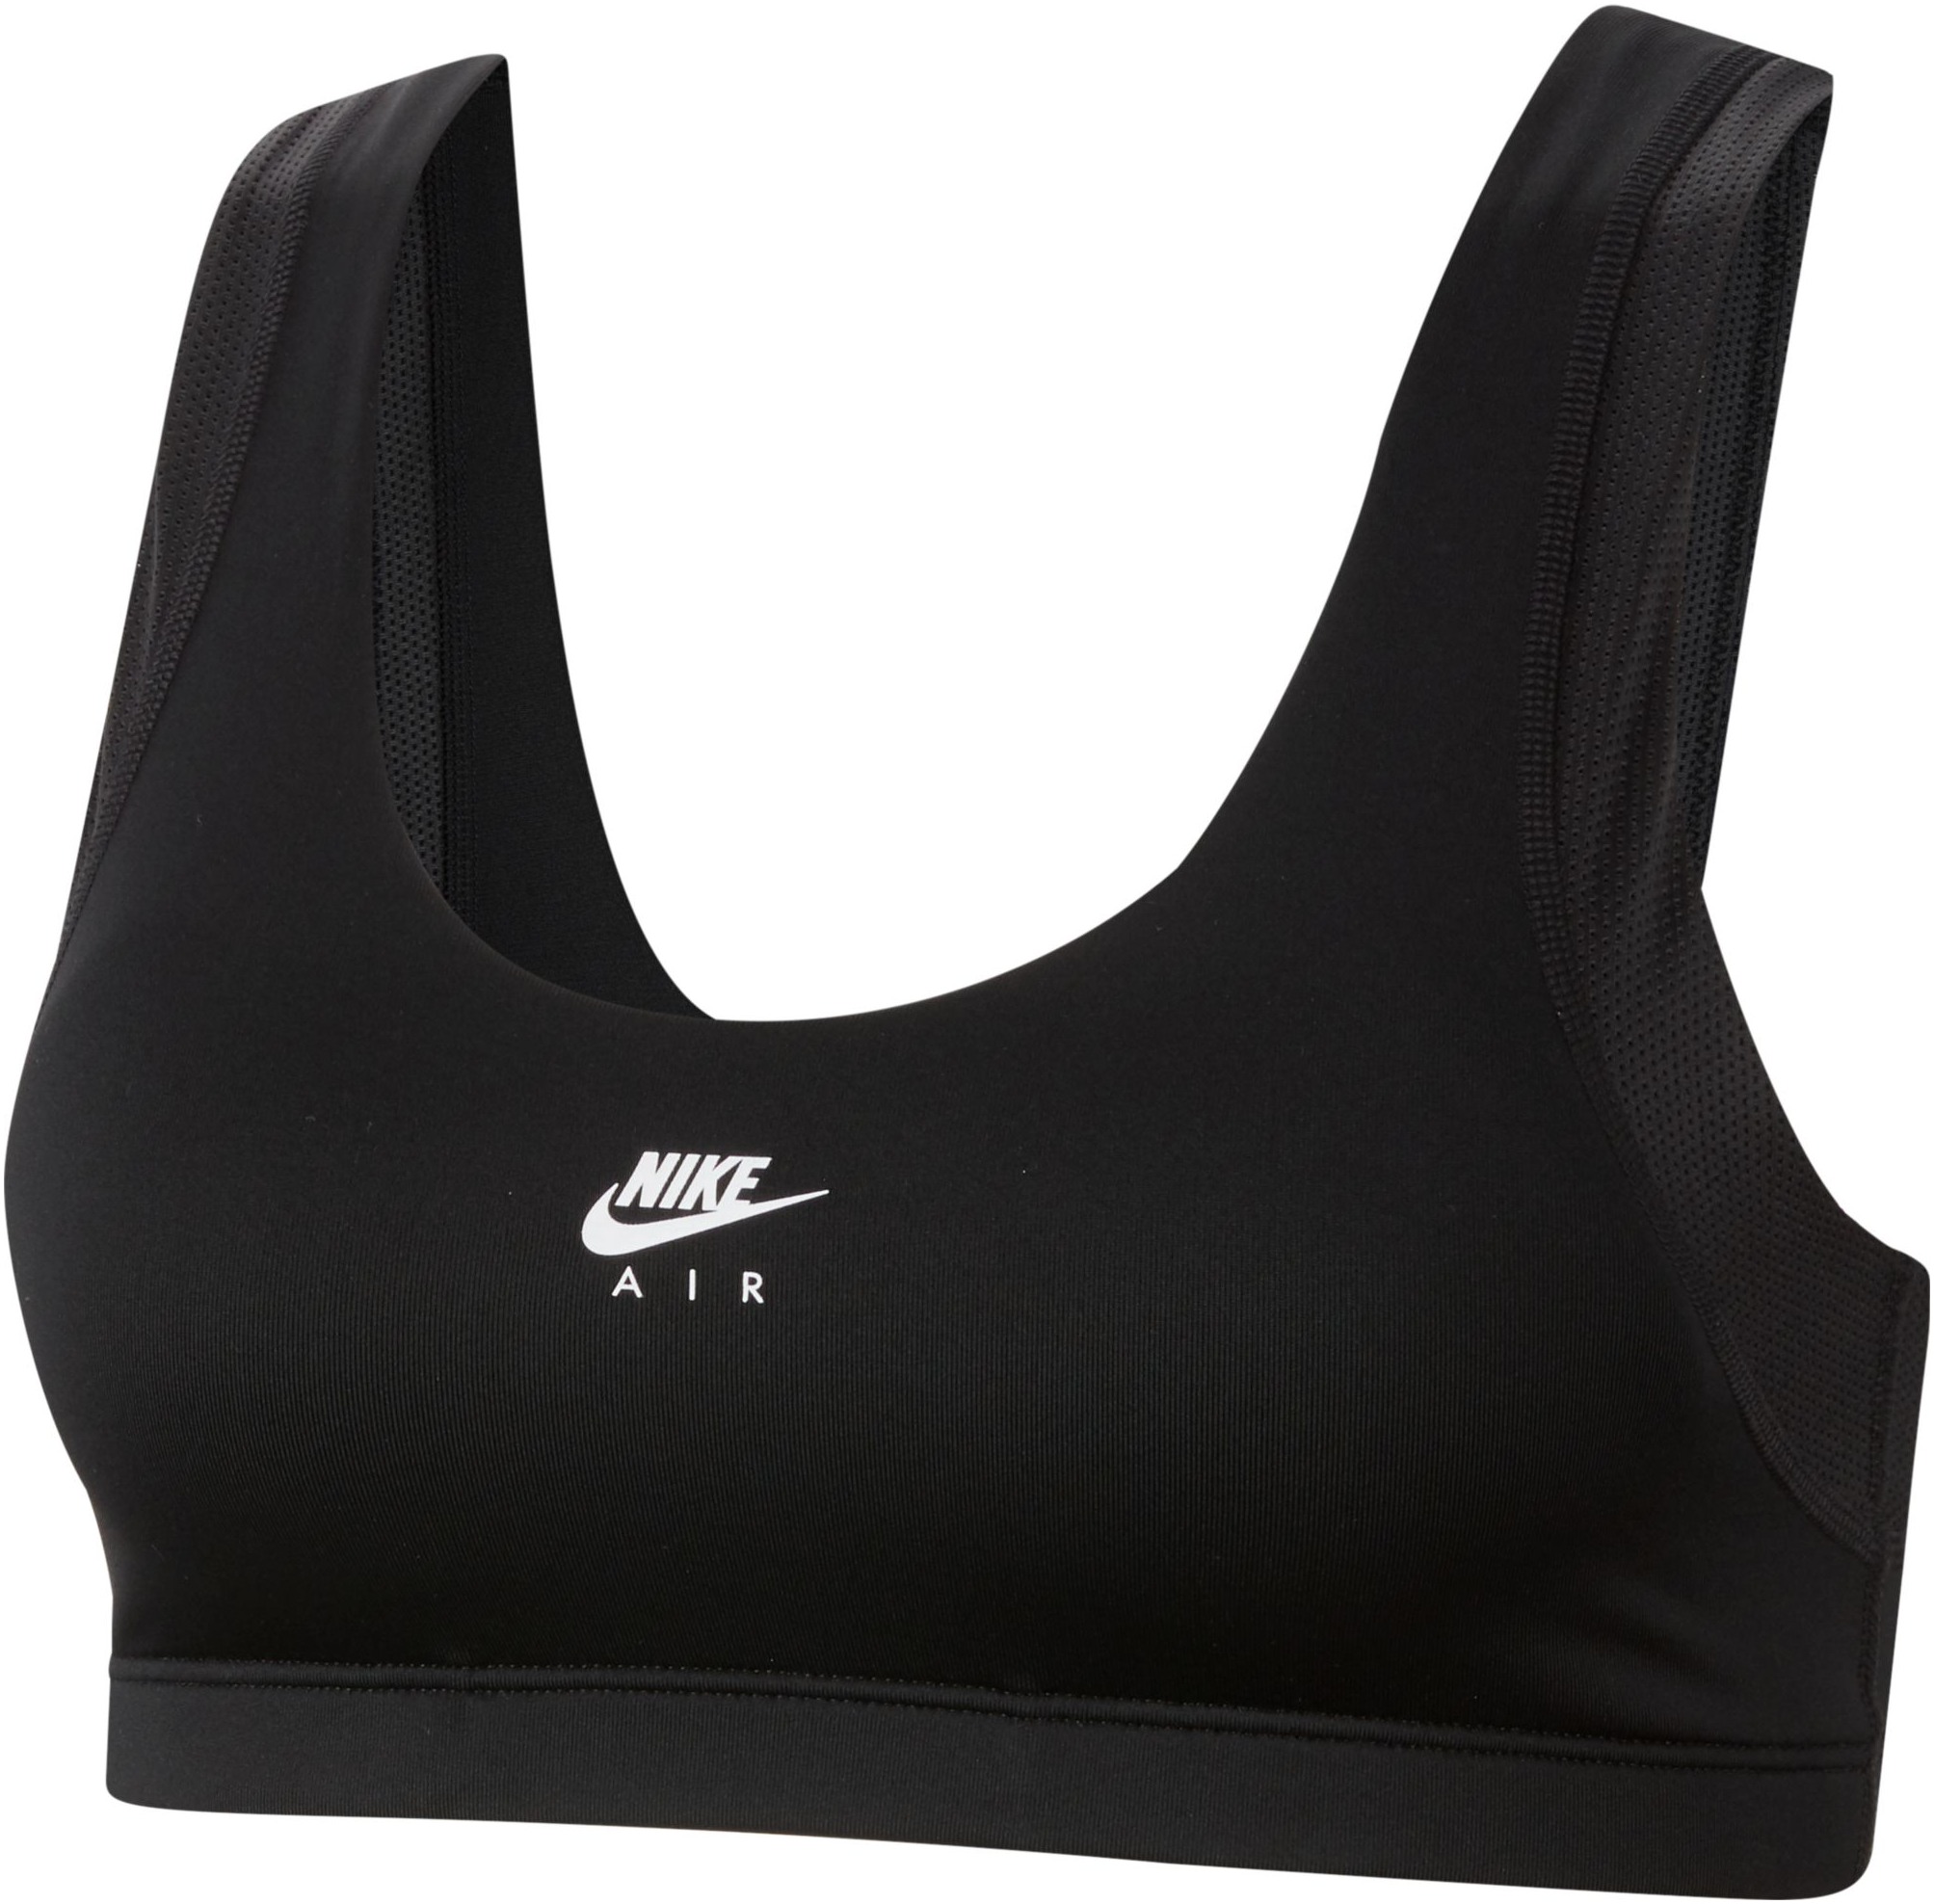 Womens sports bra with support Nike AIR INDY W black